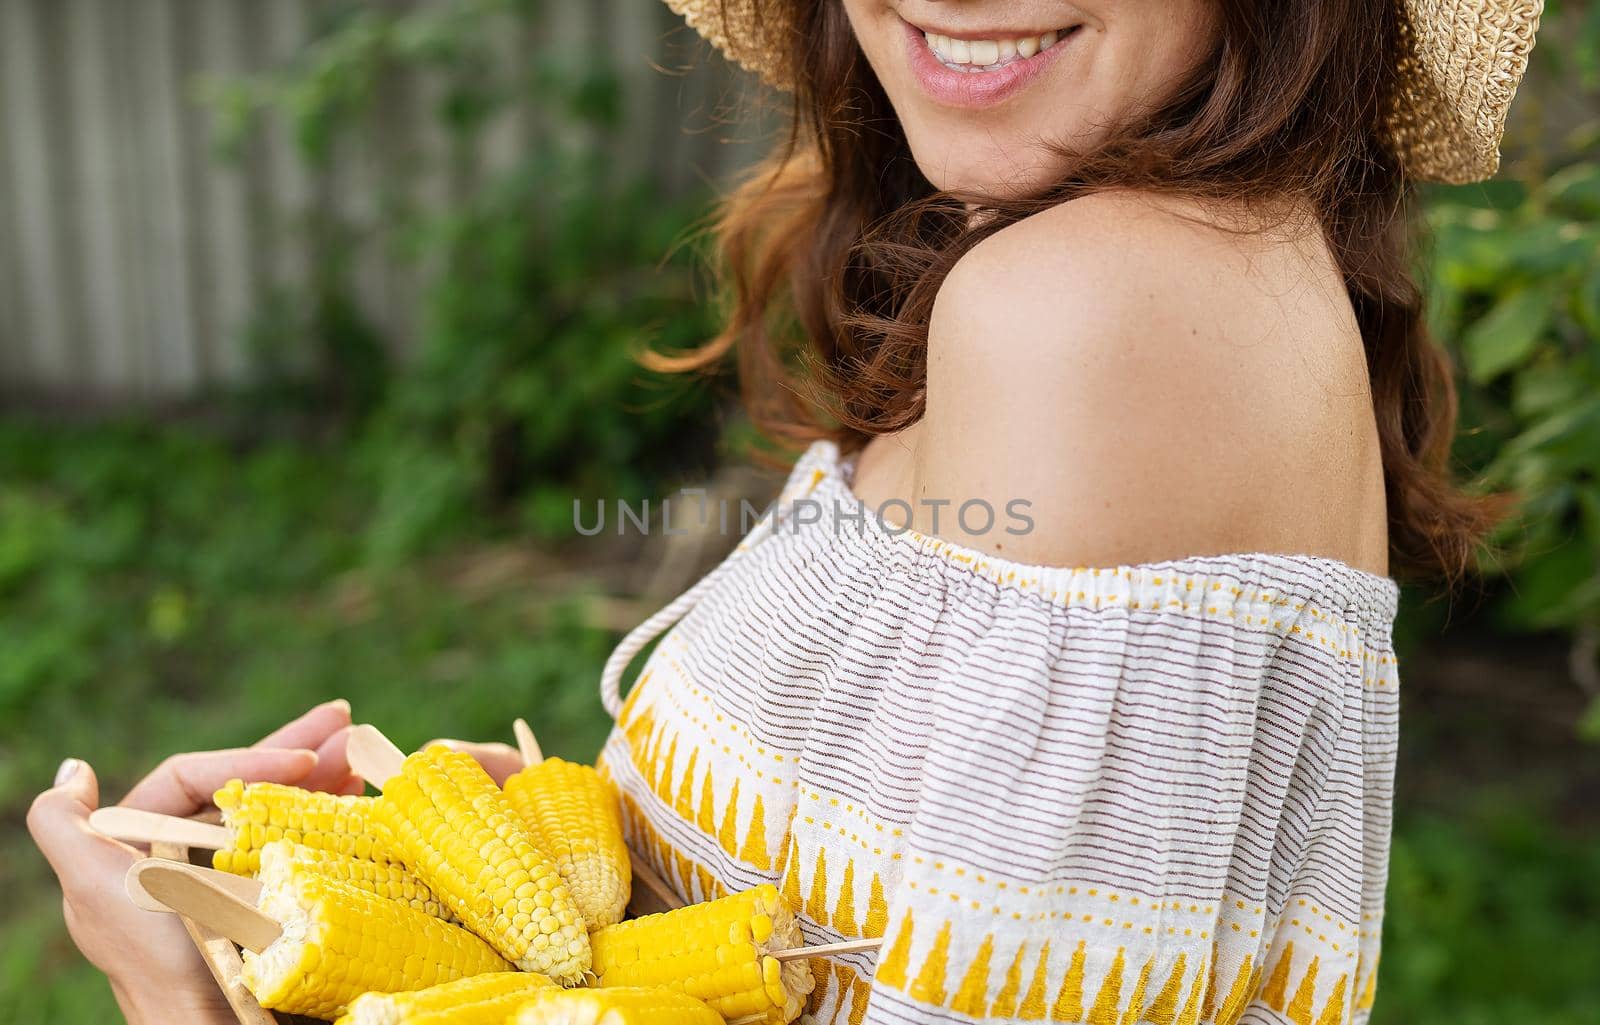 The girl is smiling in a straw hat and holding a plate with boiled corn in her hands. The concept of outdoor recreation, barbecue